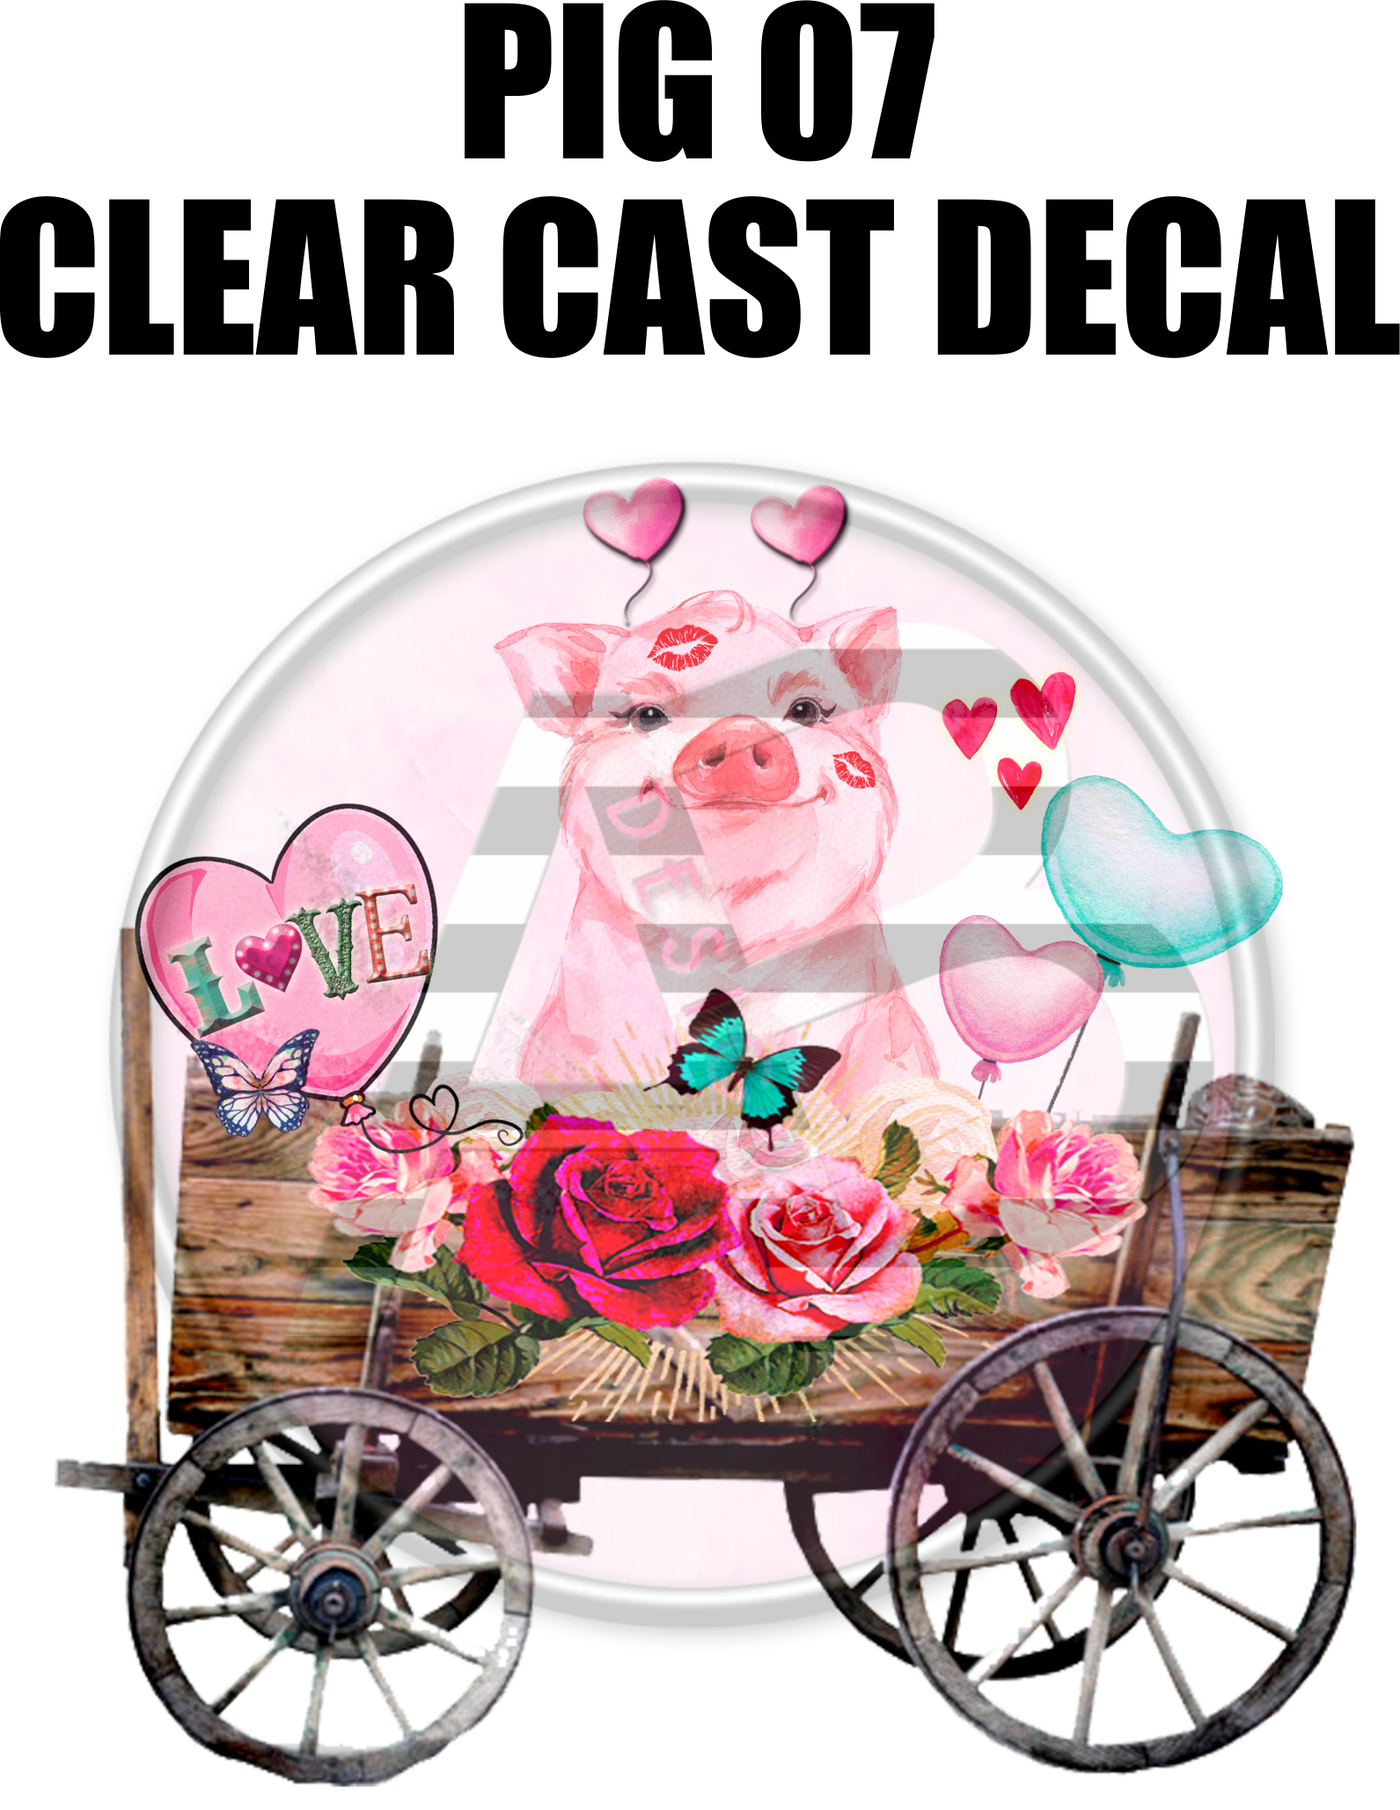 Pig 07 - Clear Cast Decal-429